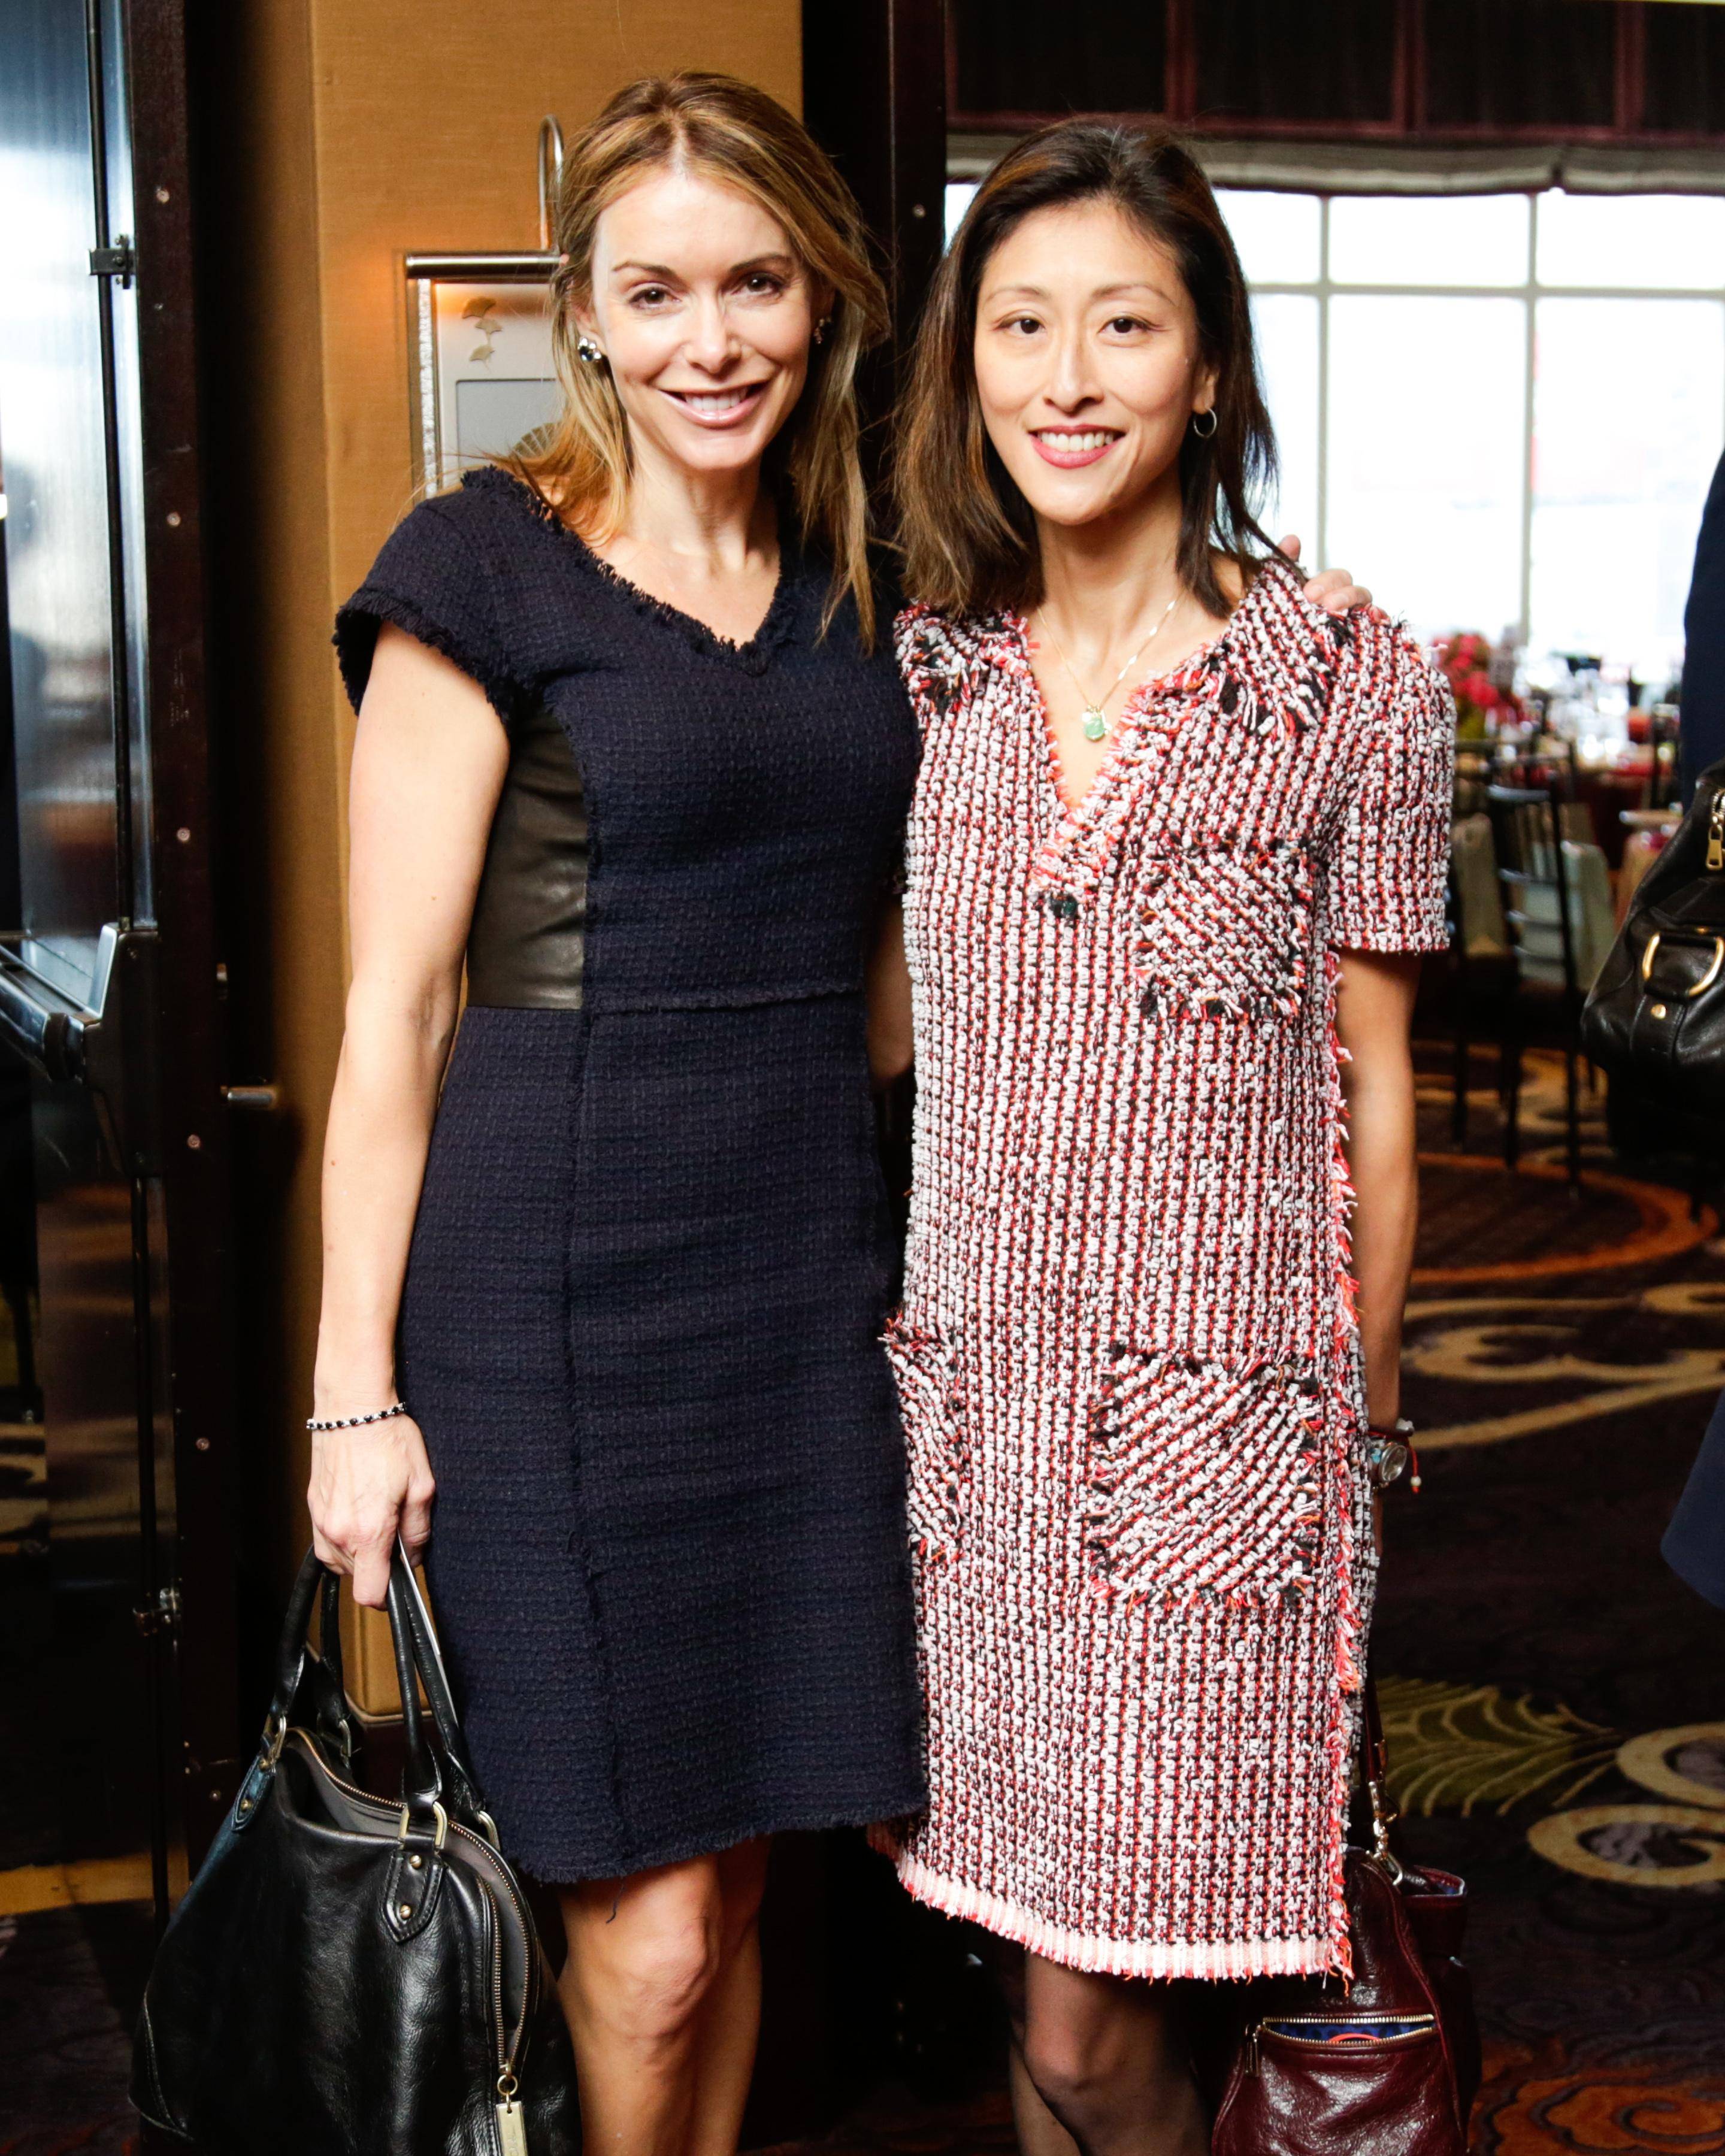 CENTRAL PARK CONSERVANCY'S Annual Fall Luncheon